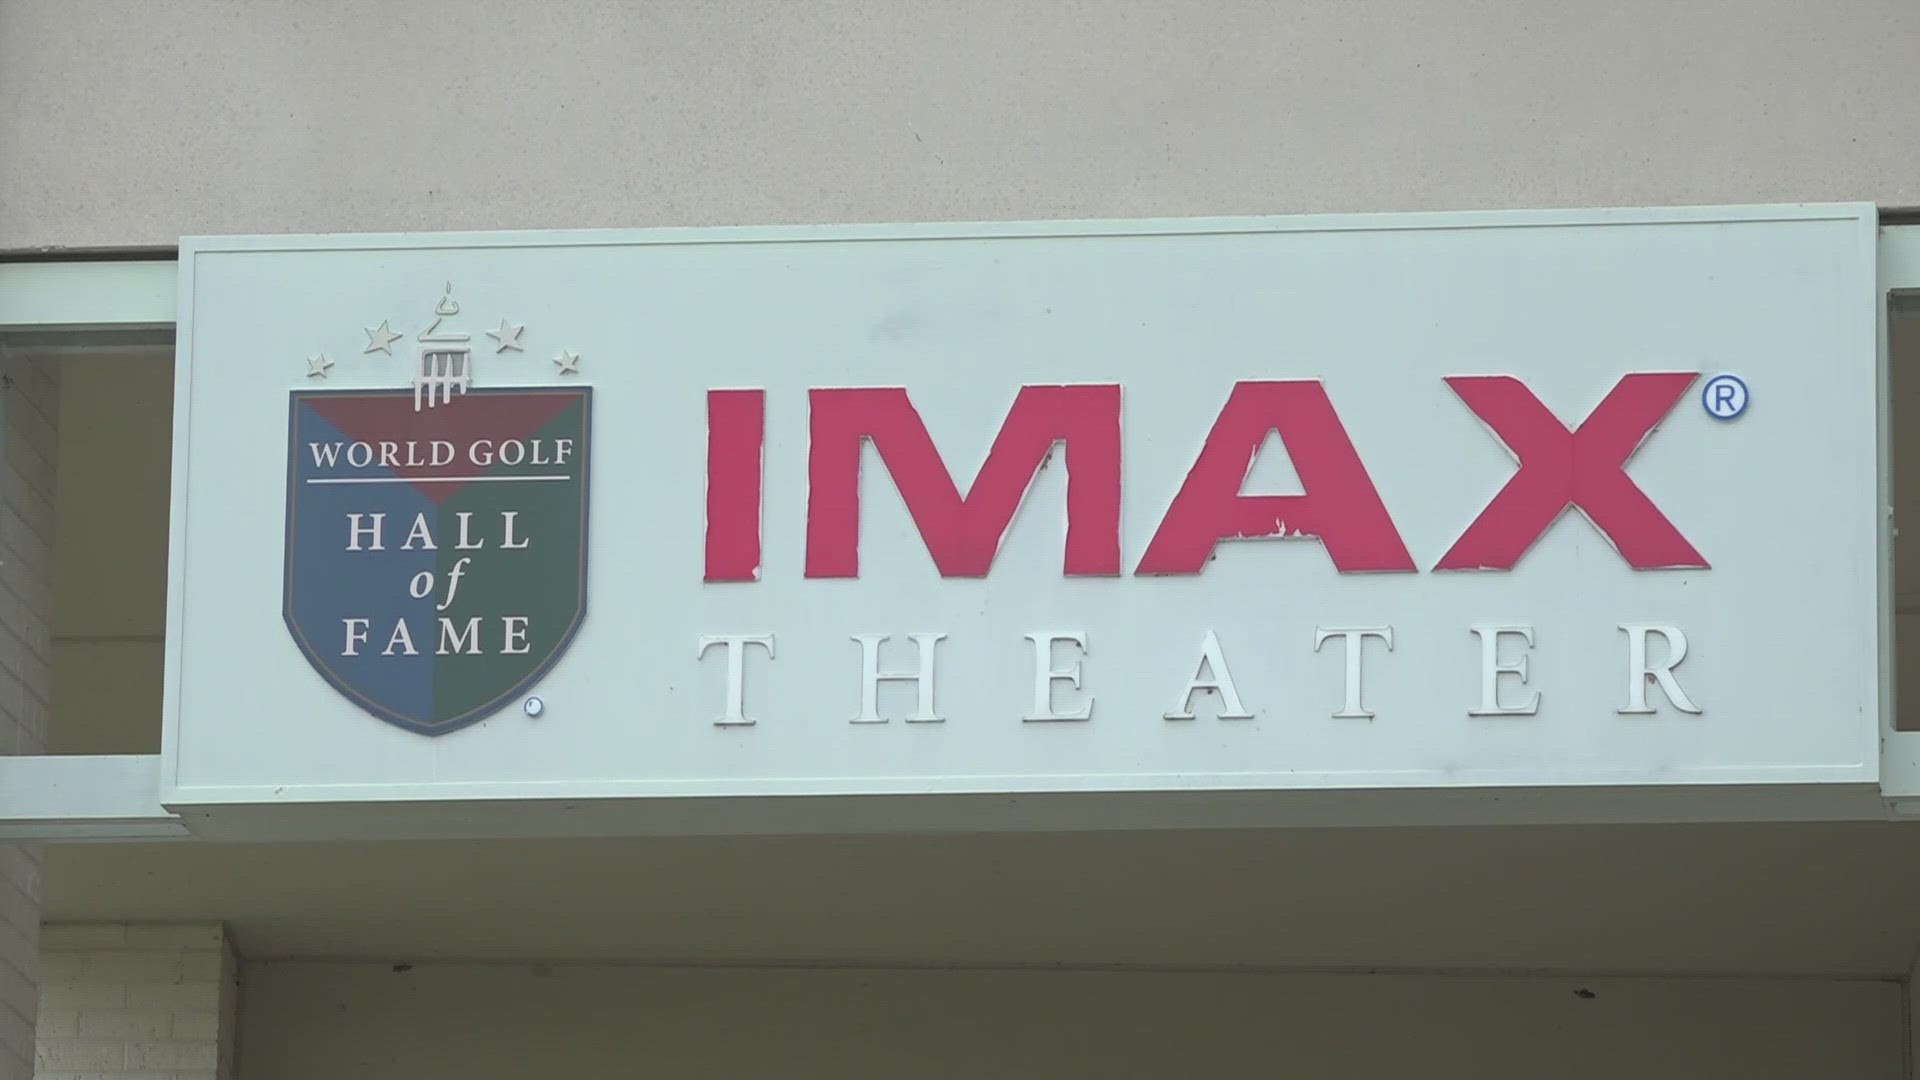 The World Golf Hall of Fame moved to North Carolina in September, but the IMAX theater in it will stay open for the "long-term."